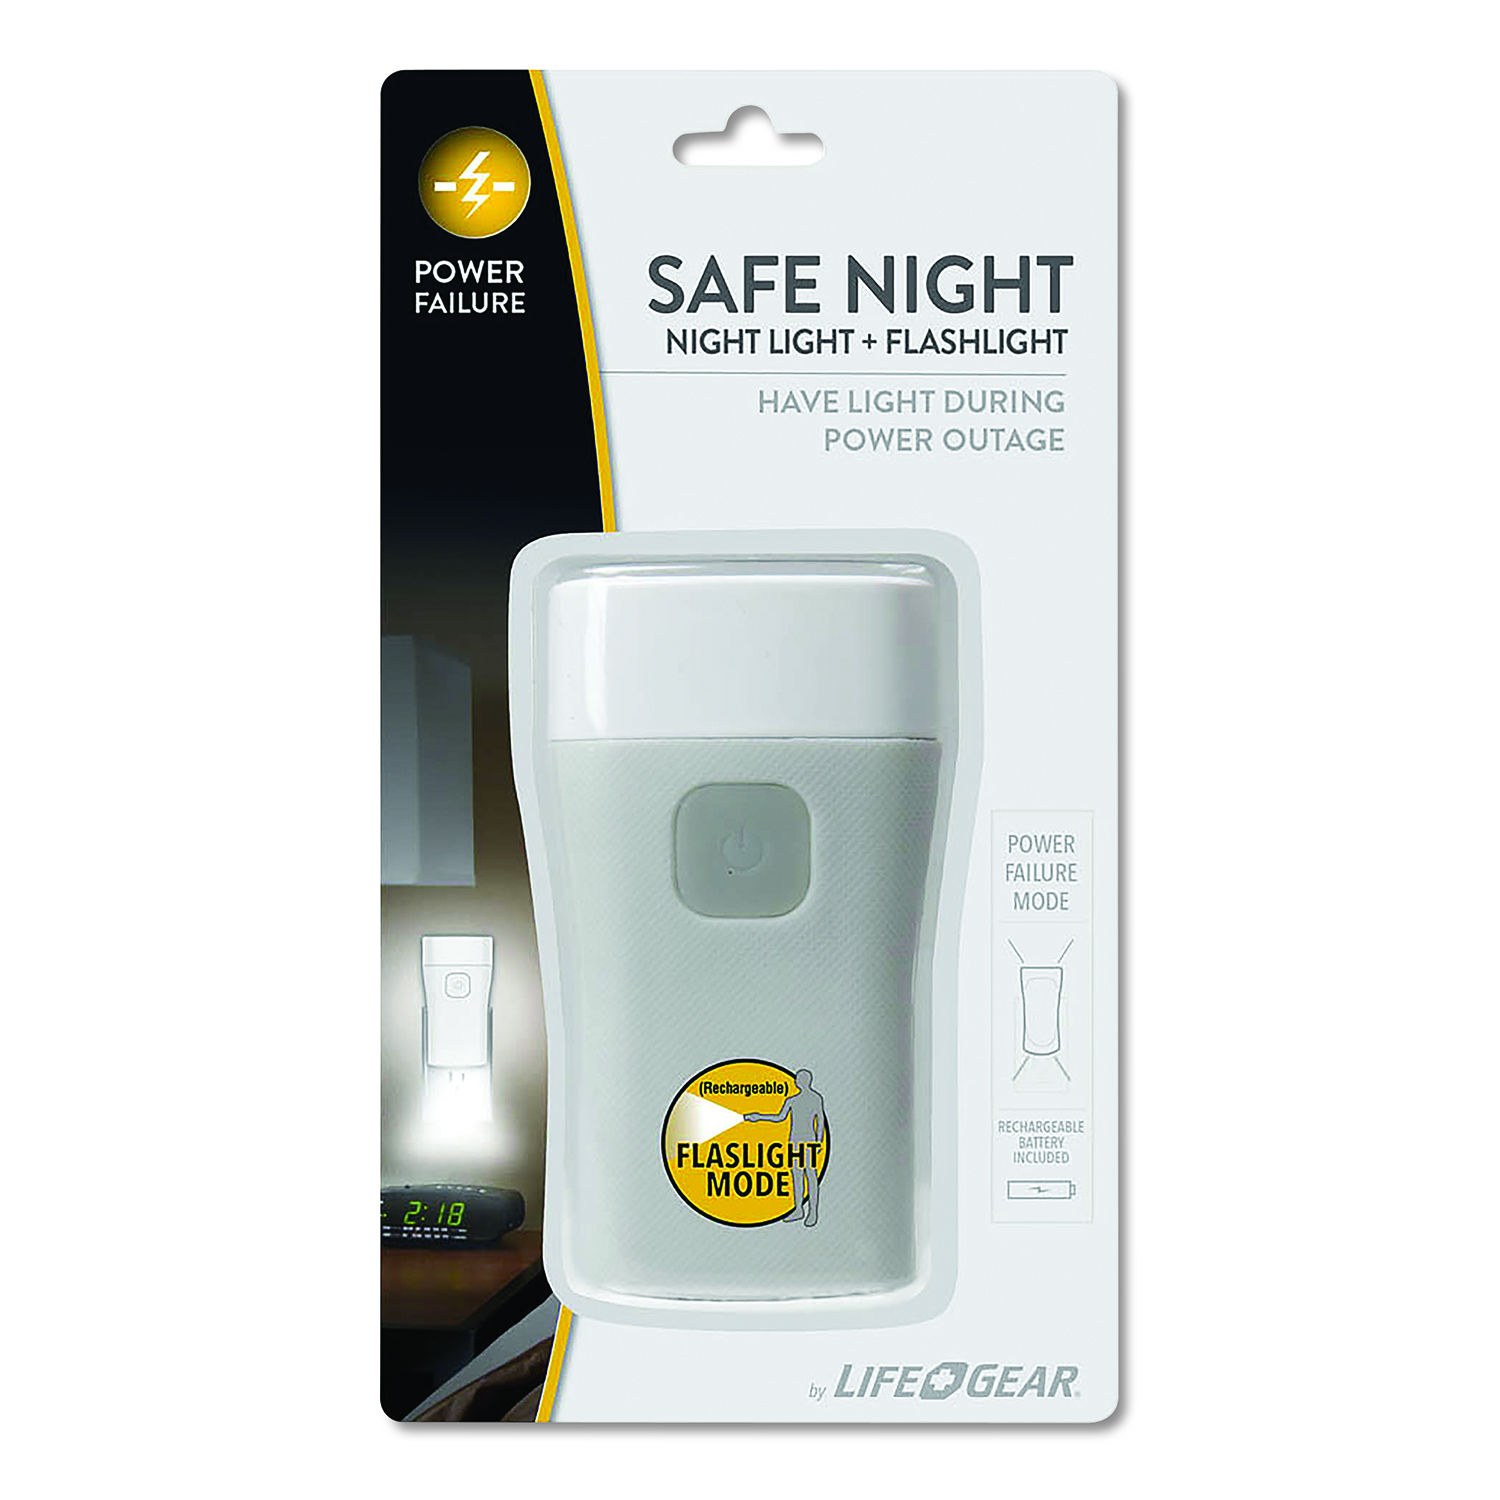  Life+Gear 413788 Safe Night Nightlight + Flashlight, 1 Rechargeable Lithium-Ion Battery (Included), Gray (DCY413788) 